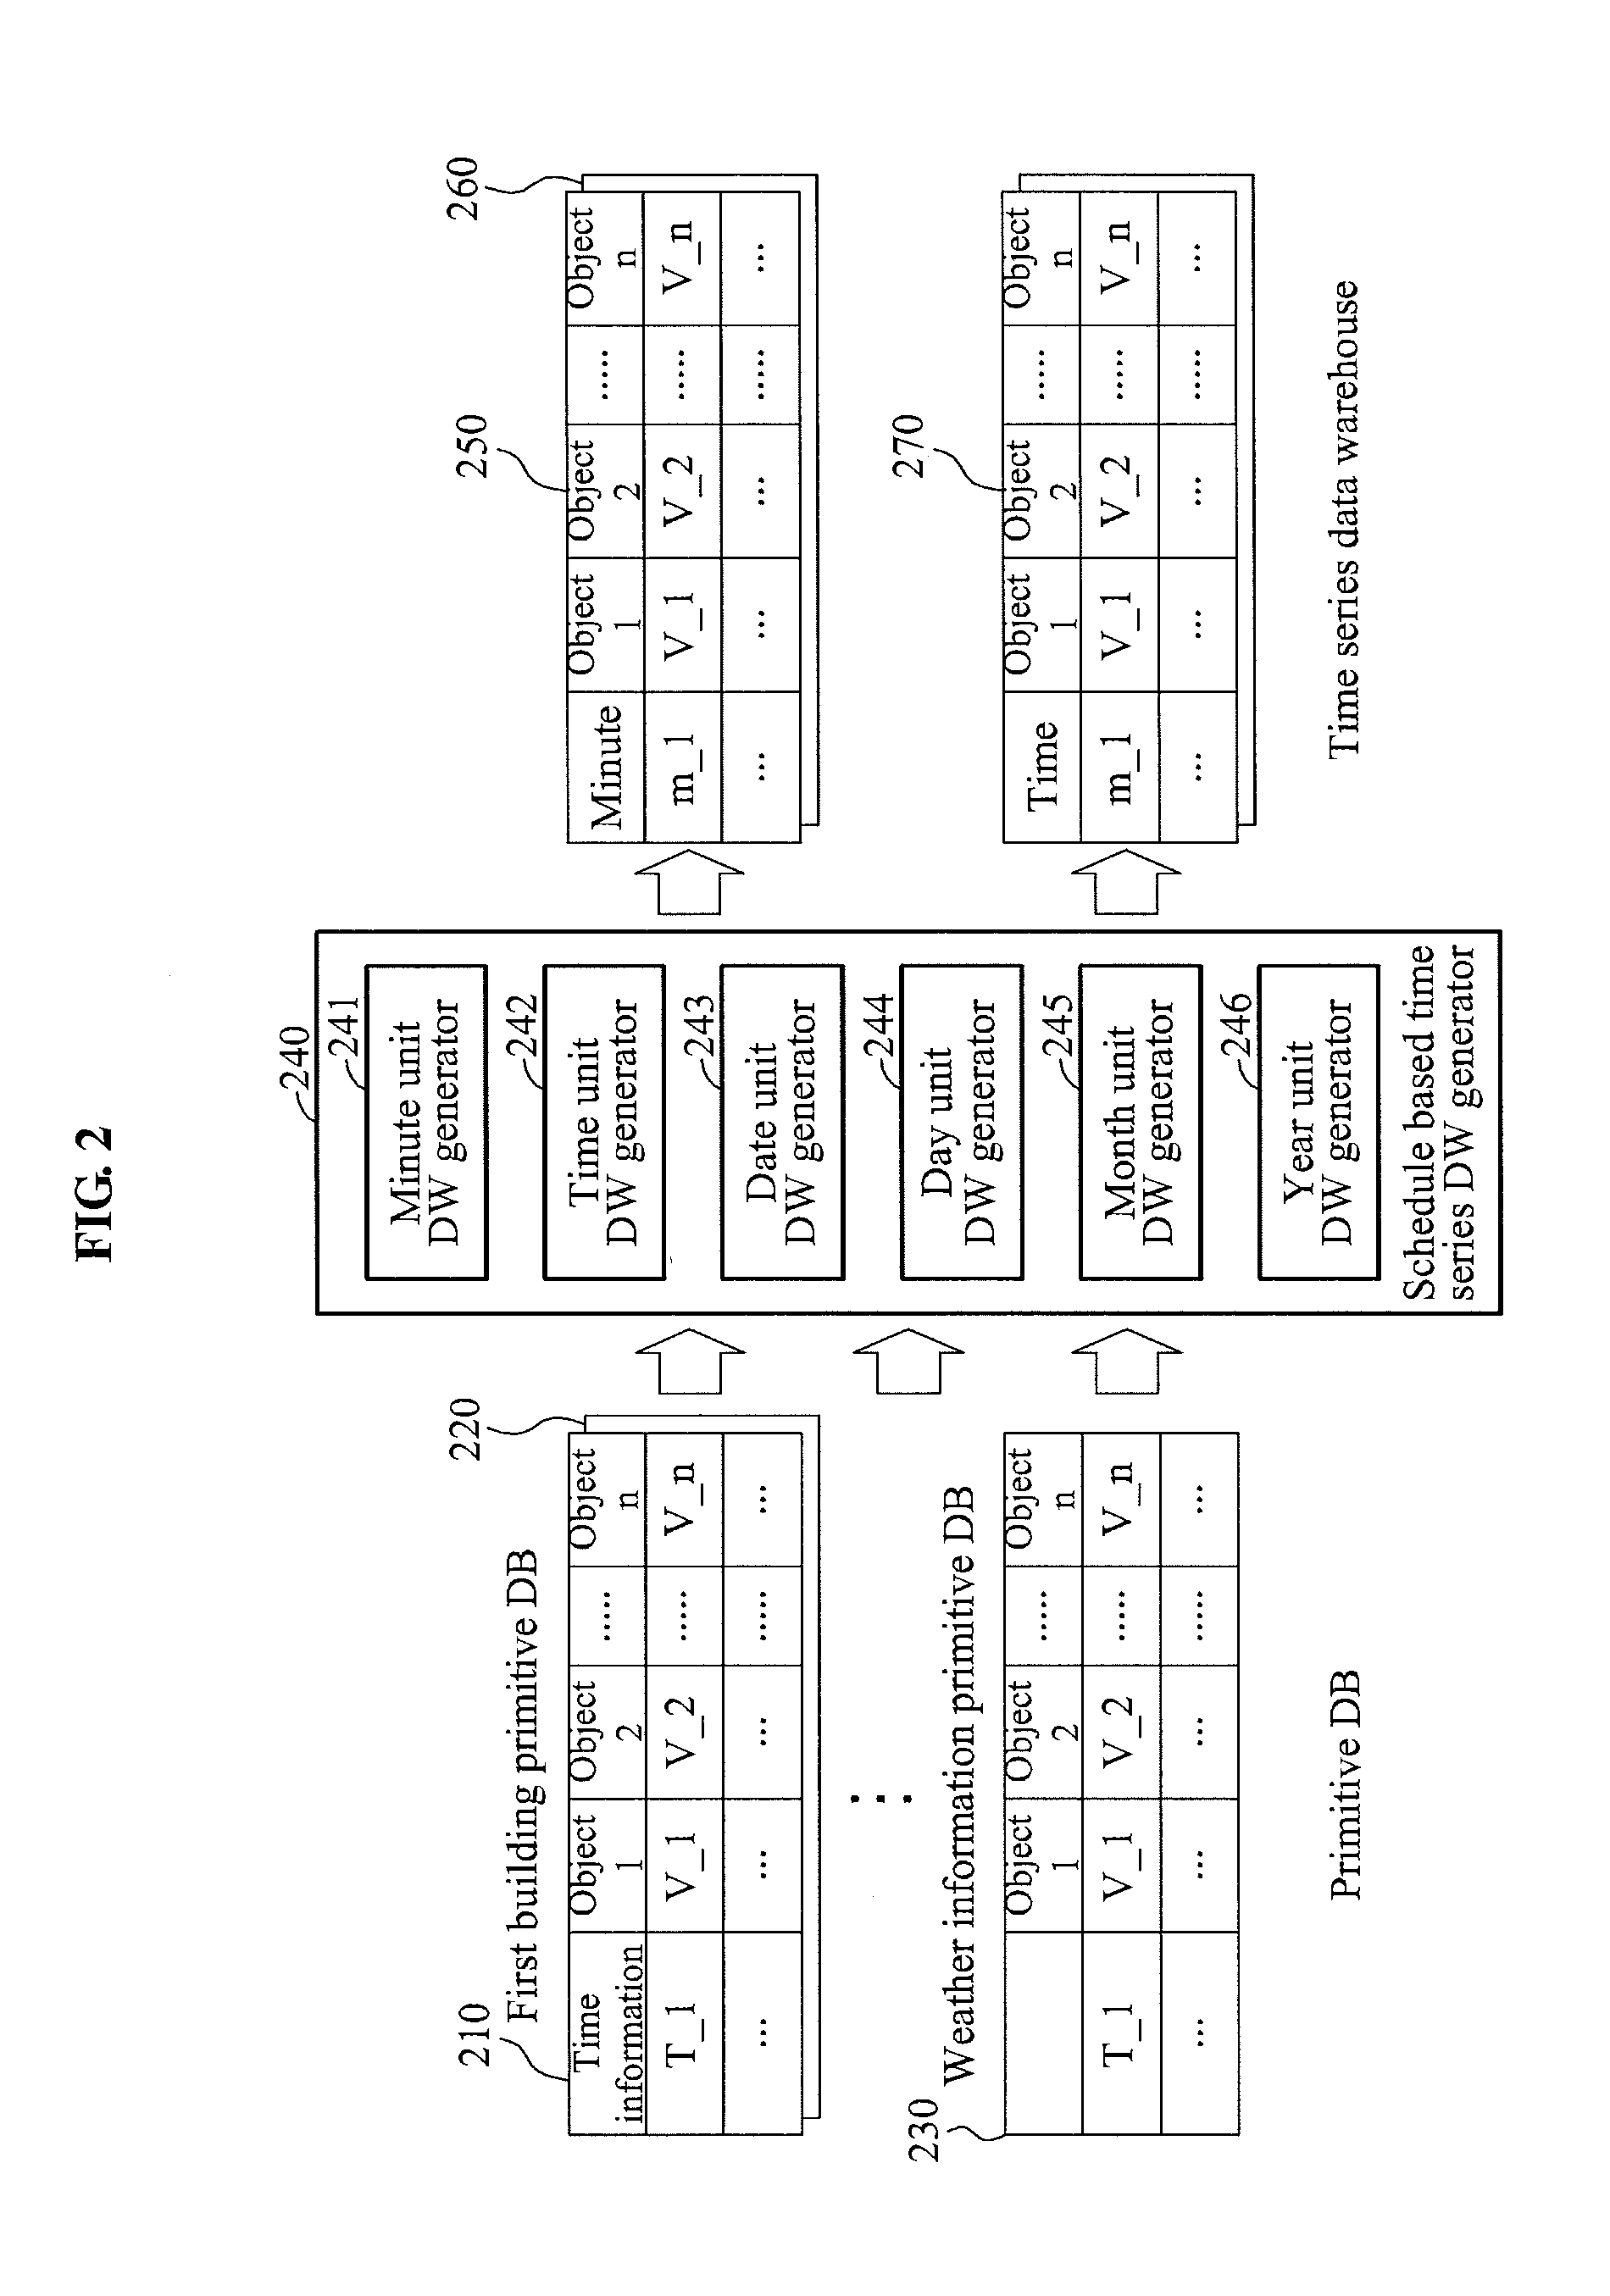 Method and apparatus for constructing data warehouse to manage mass building energy information